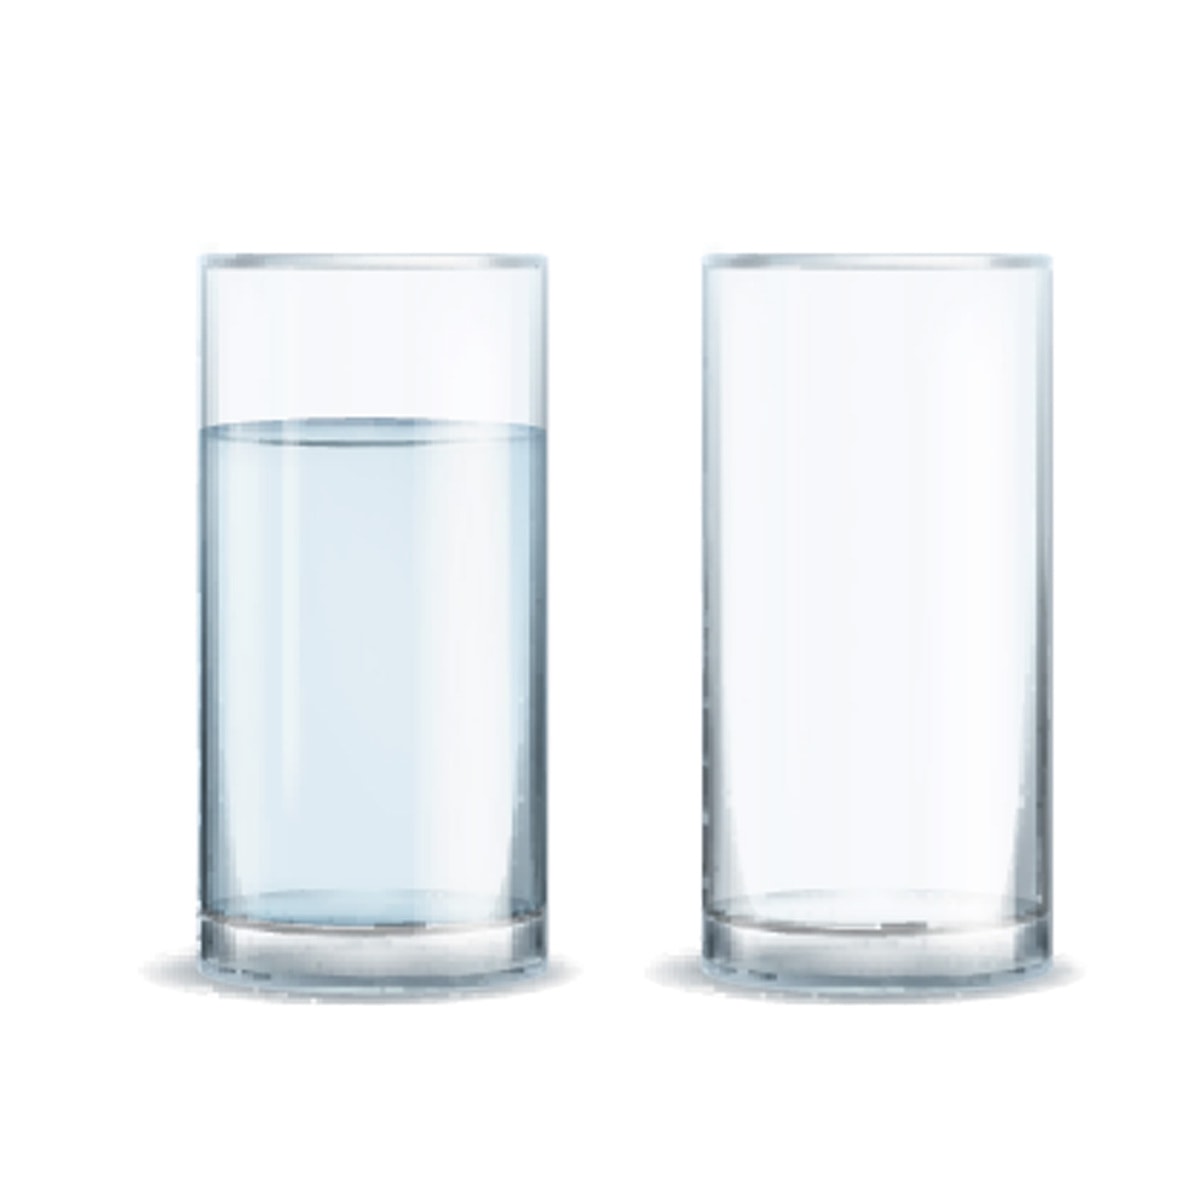 Water glass realistic set. 